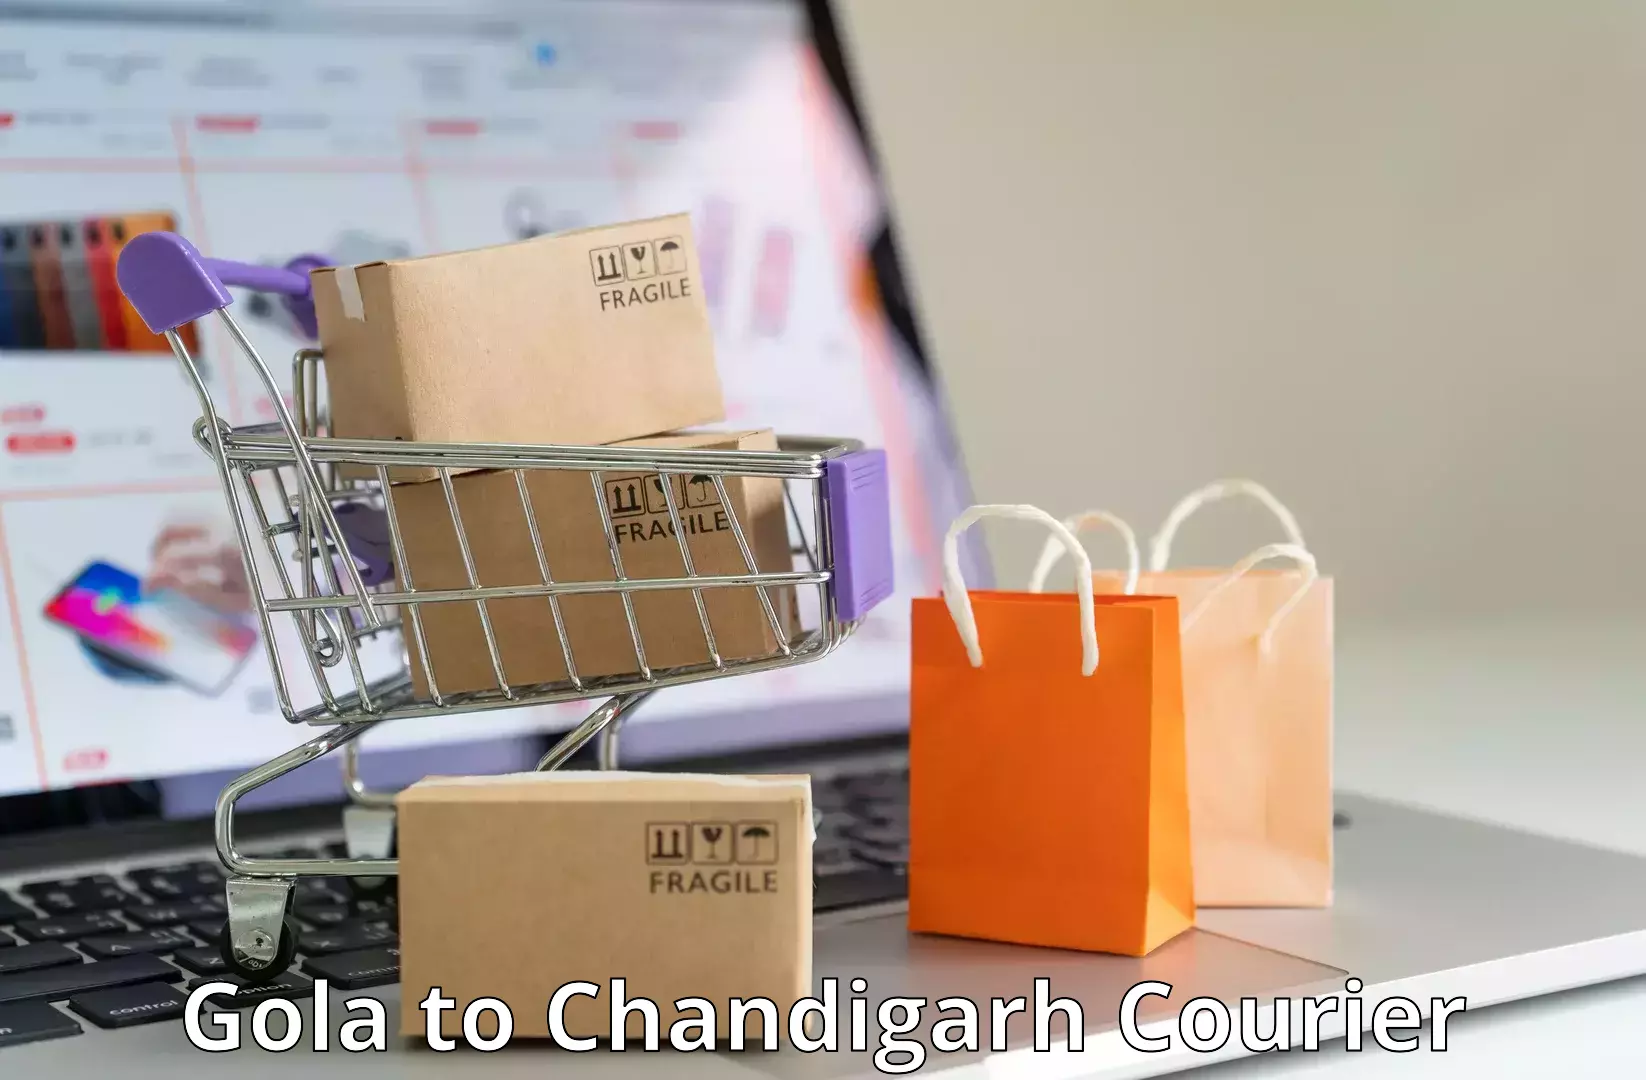 Ocean freight courier Gola to Chandigarh